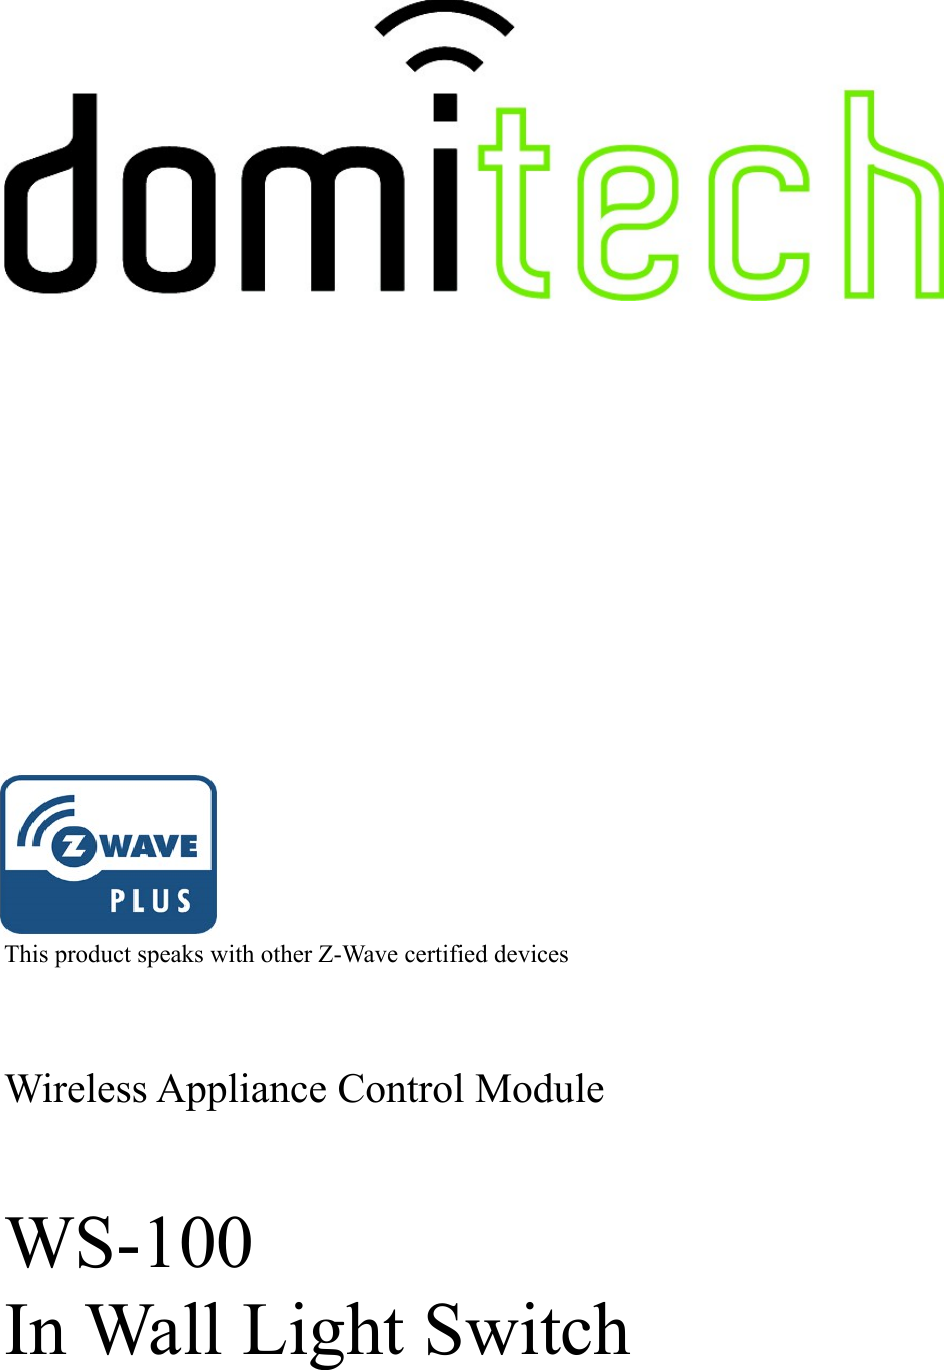                                This product speaks with other Z-Wave certified devicesWireless Appliance Control ModuleWS-100In Wall Light Switch